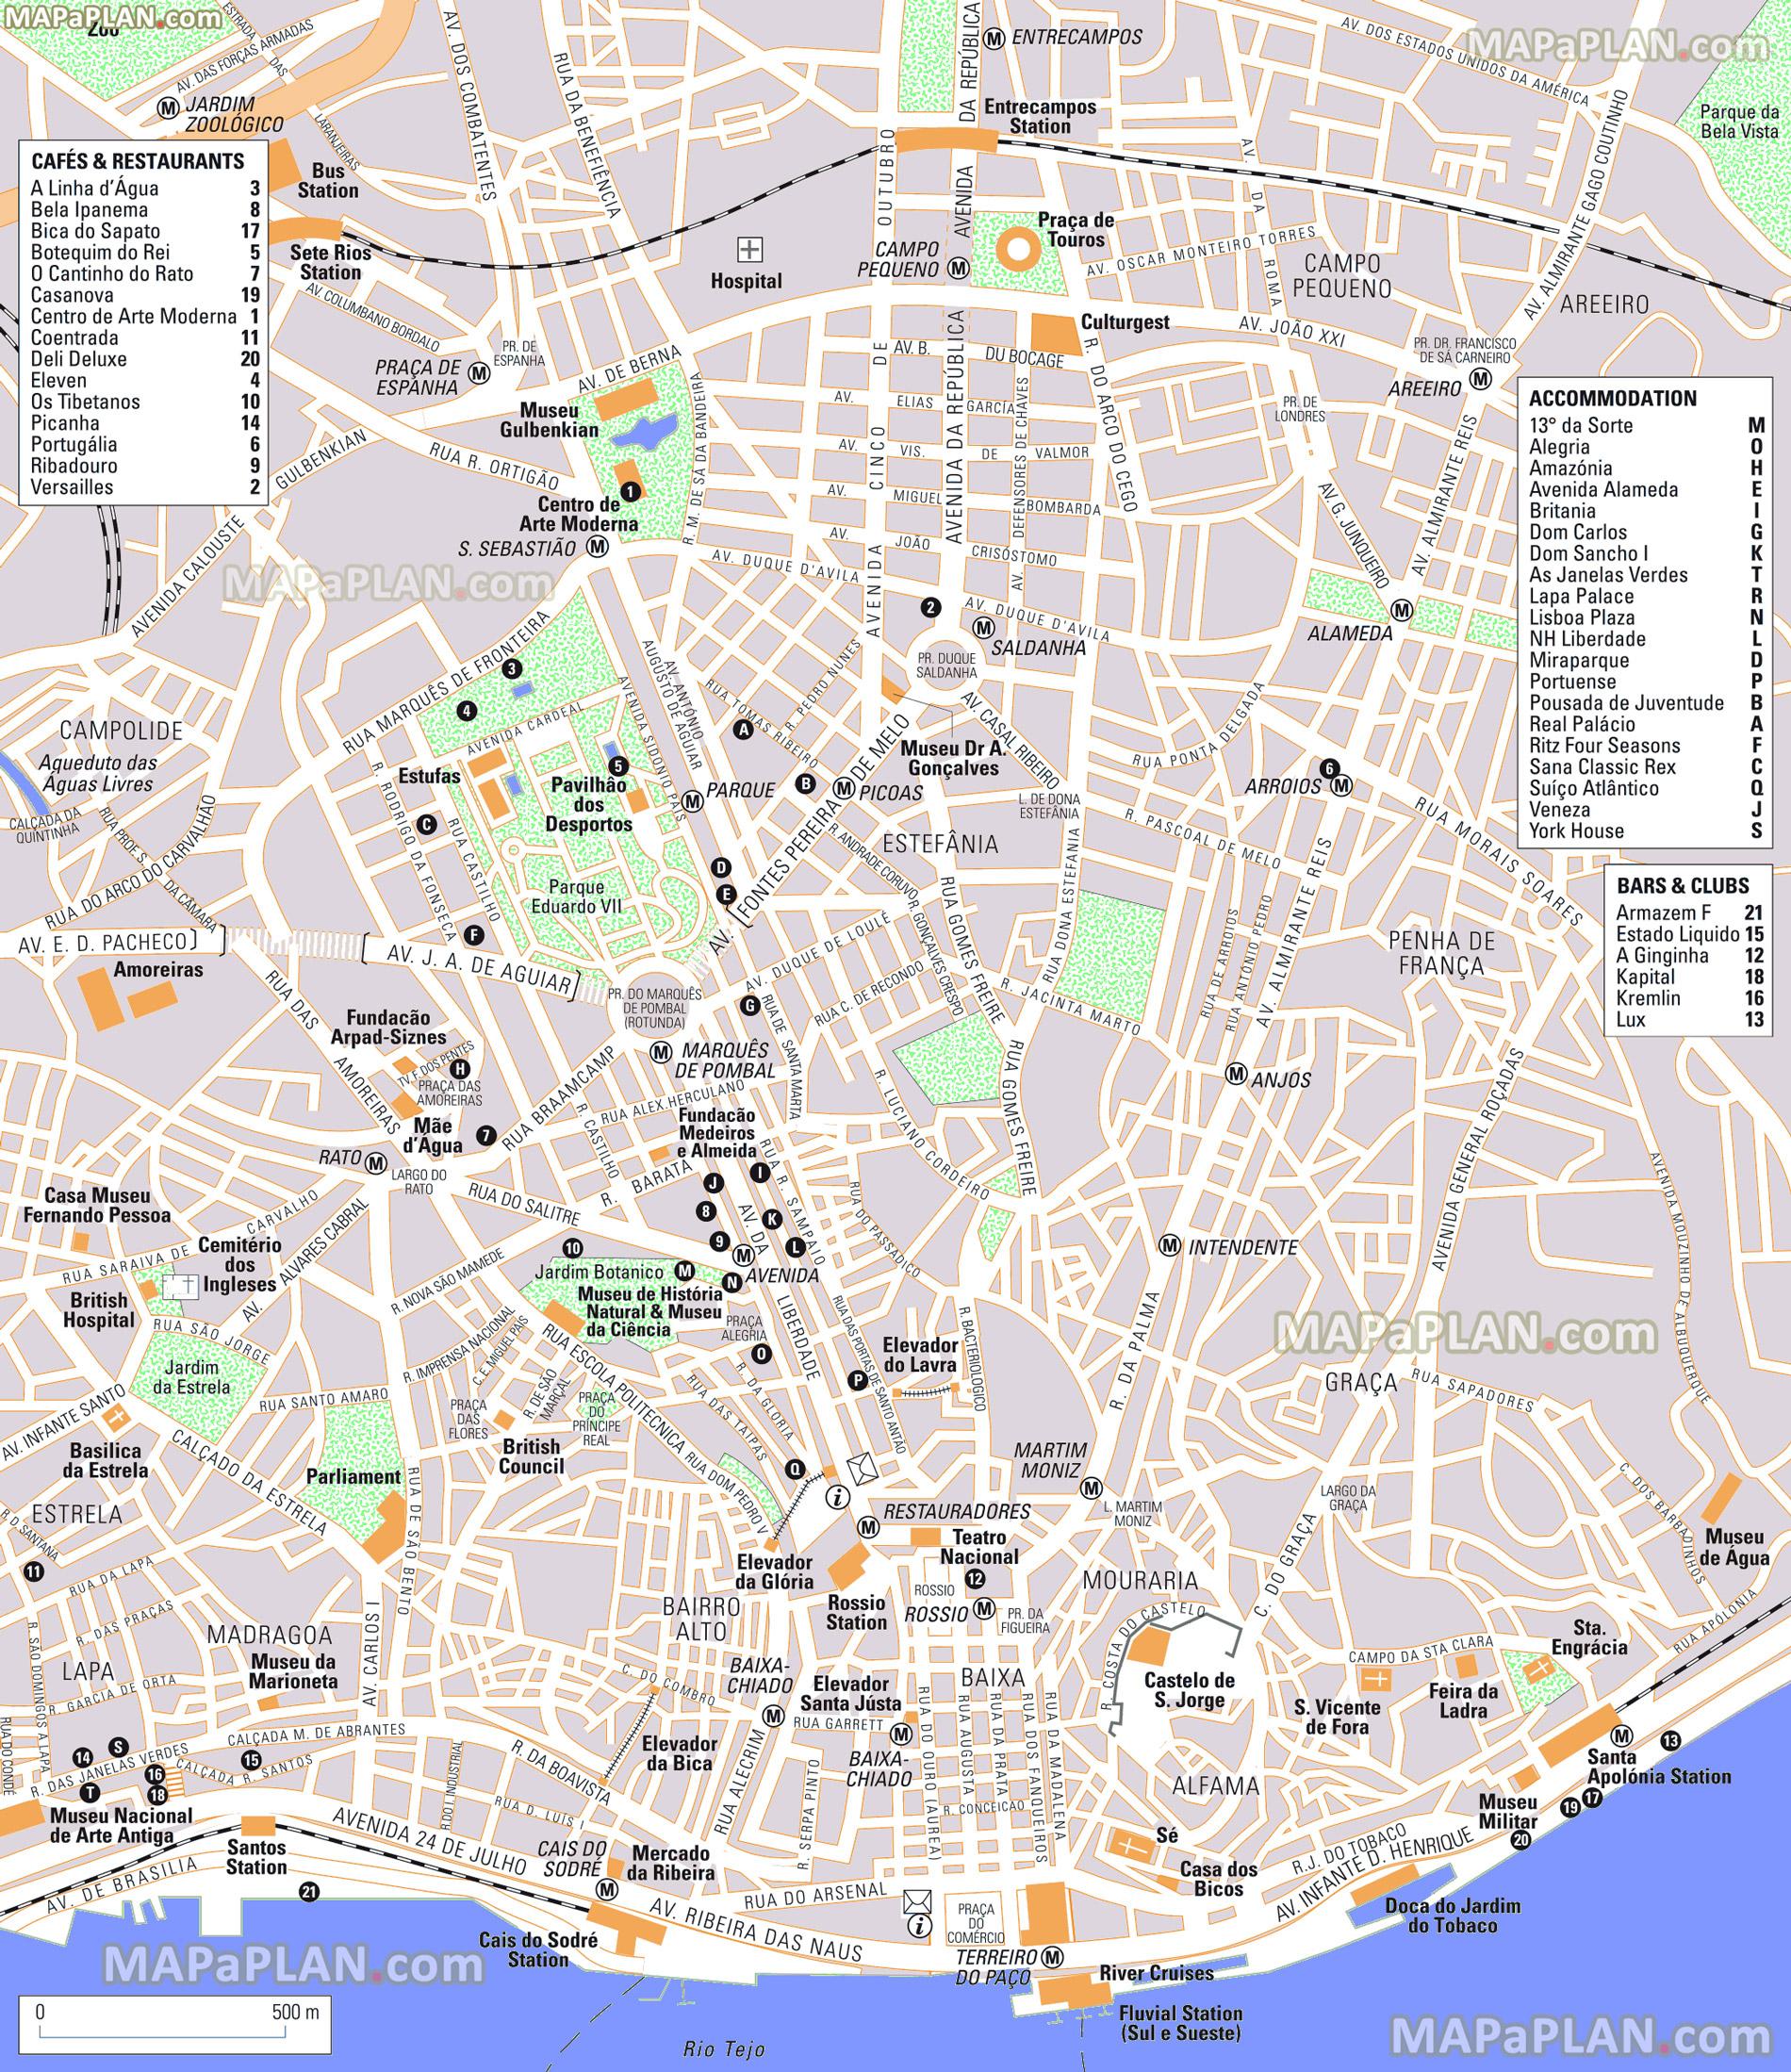 Map of Lisbon tourist: attractions and monuments of Lisbon